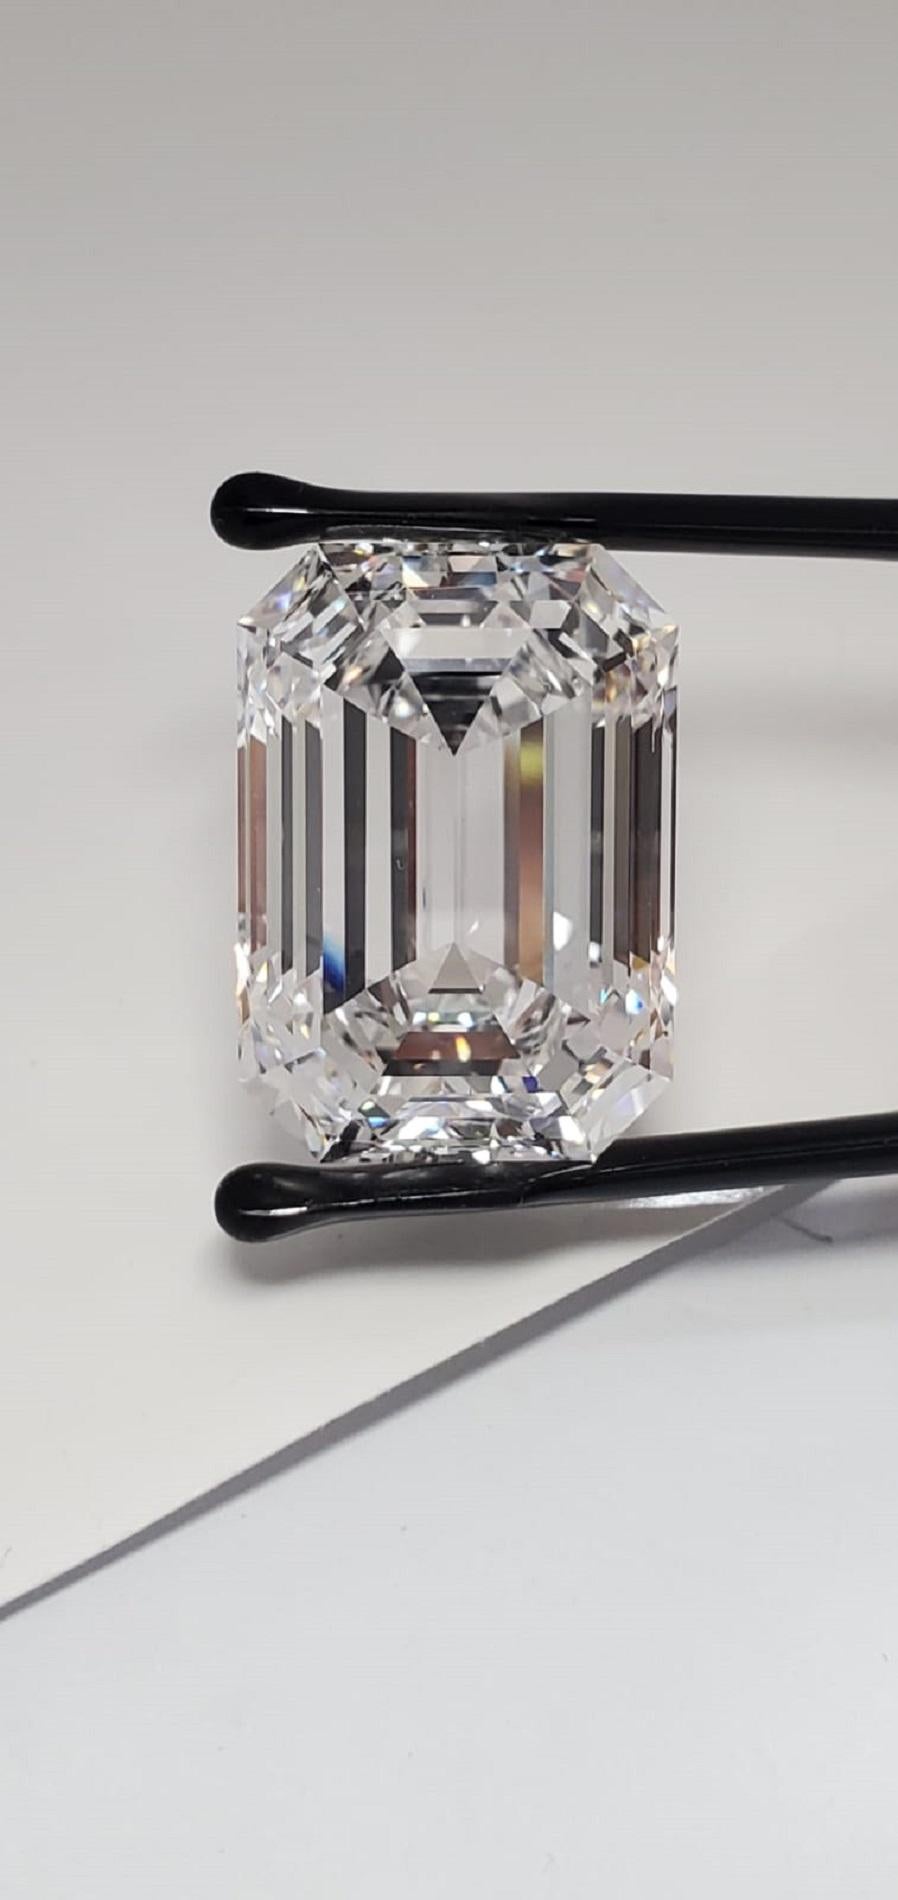 EXCEPTIONAL GIA Certified 30 Carat Emerald Cut Diamond D COLOR Flawless 
for investment purposes 
